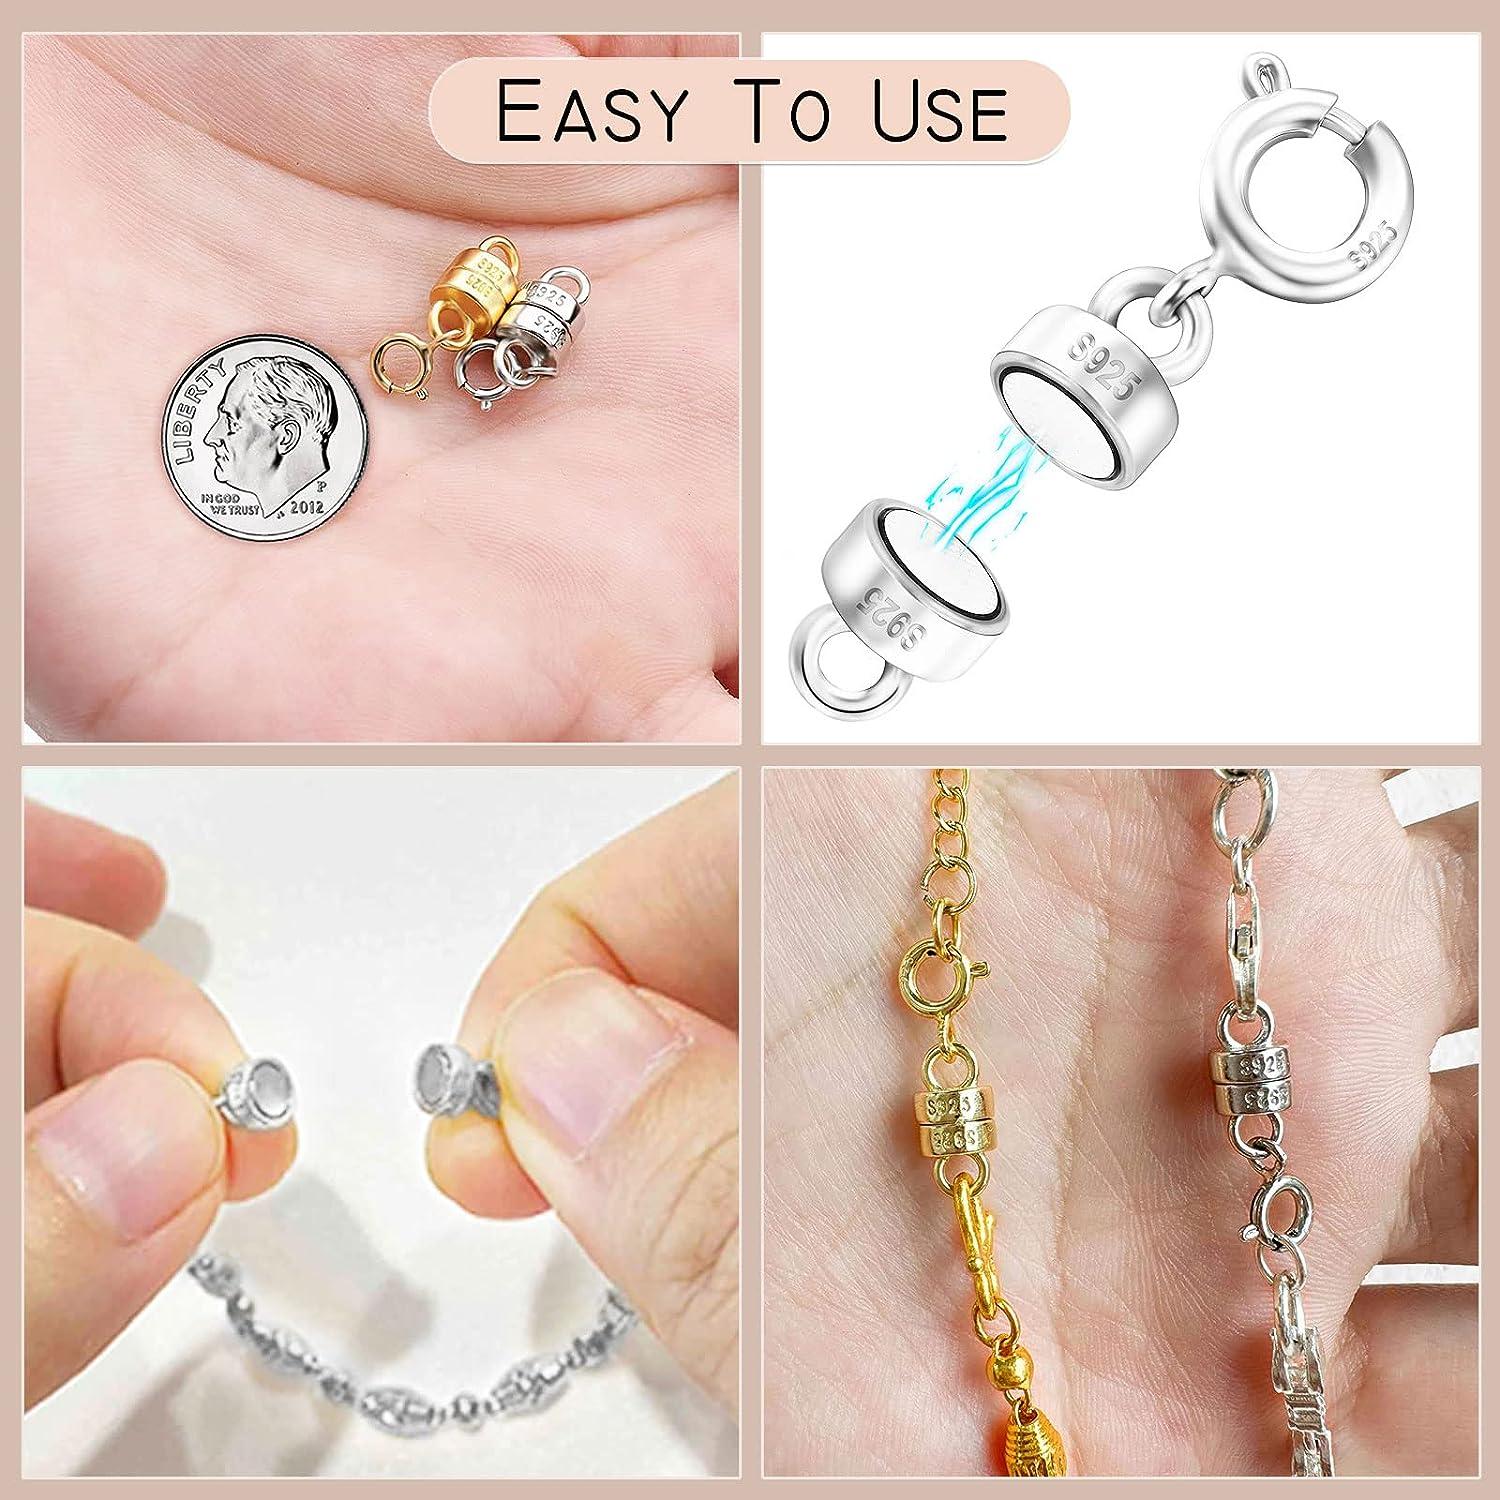 Magnet Extender converts necklaces to magnetic clasp, no tools necessa